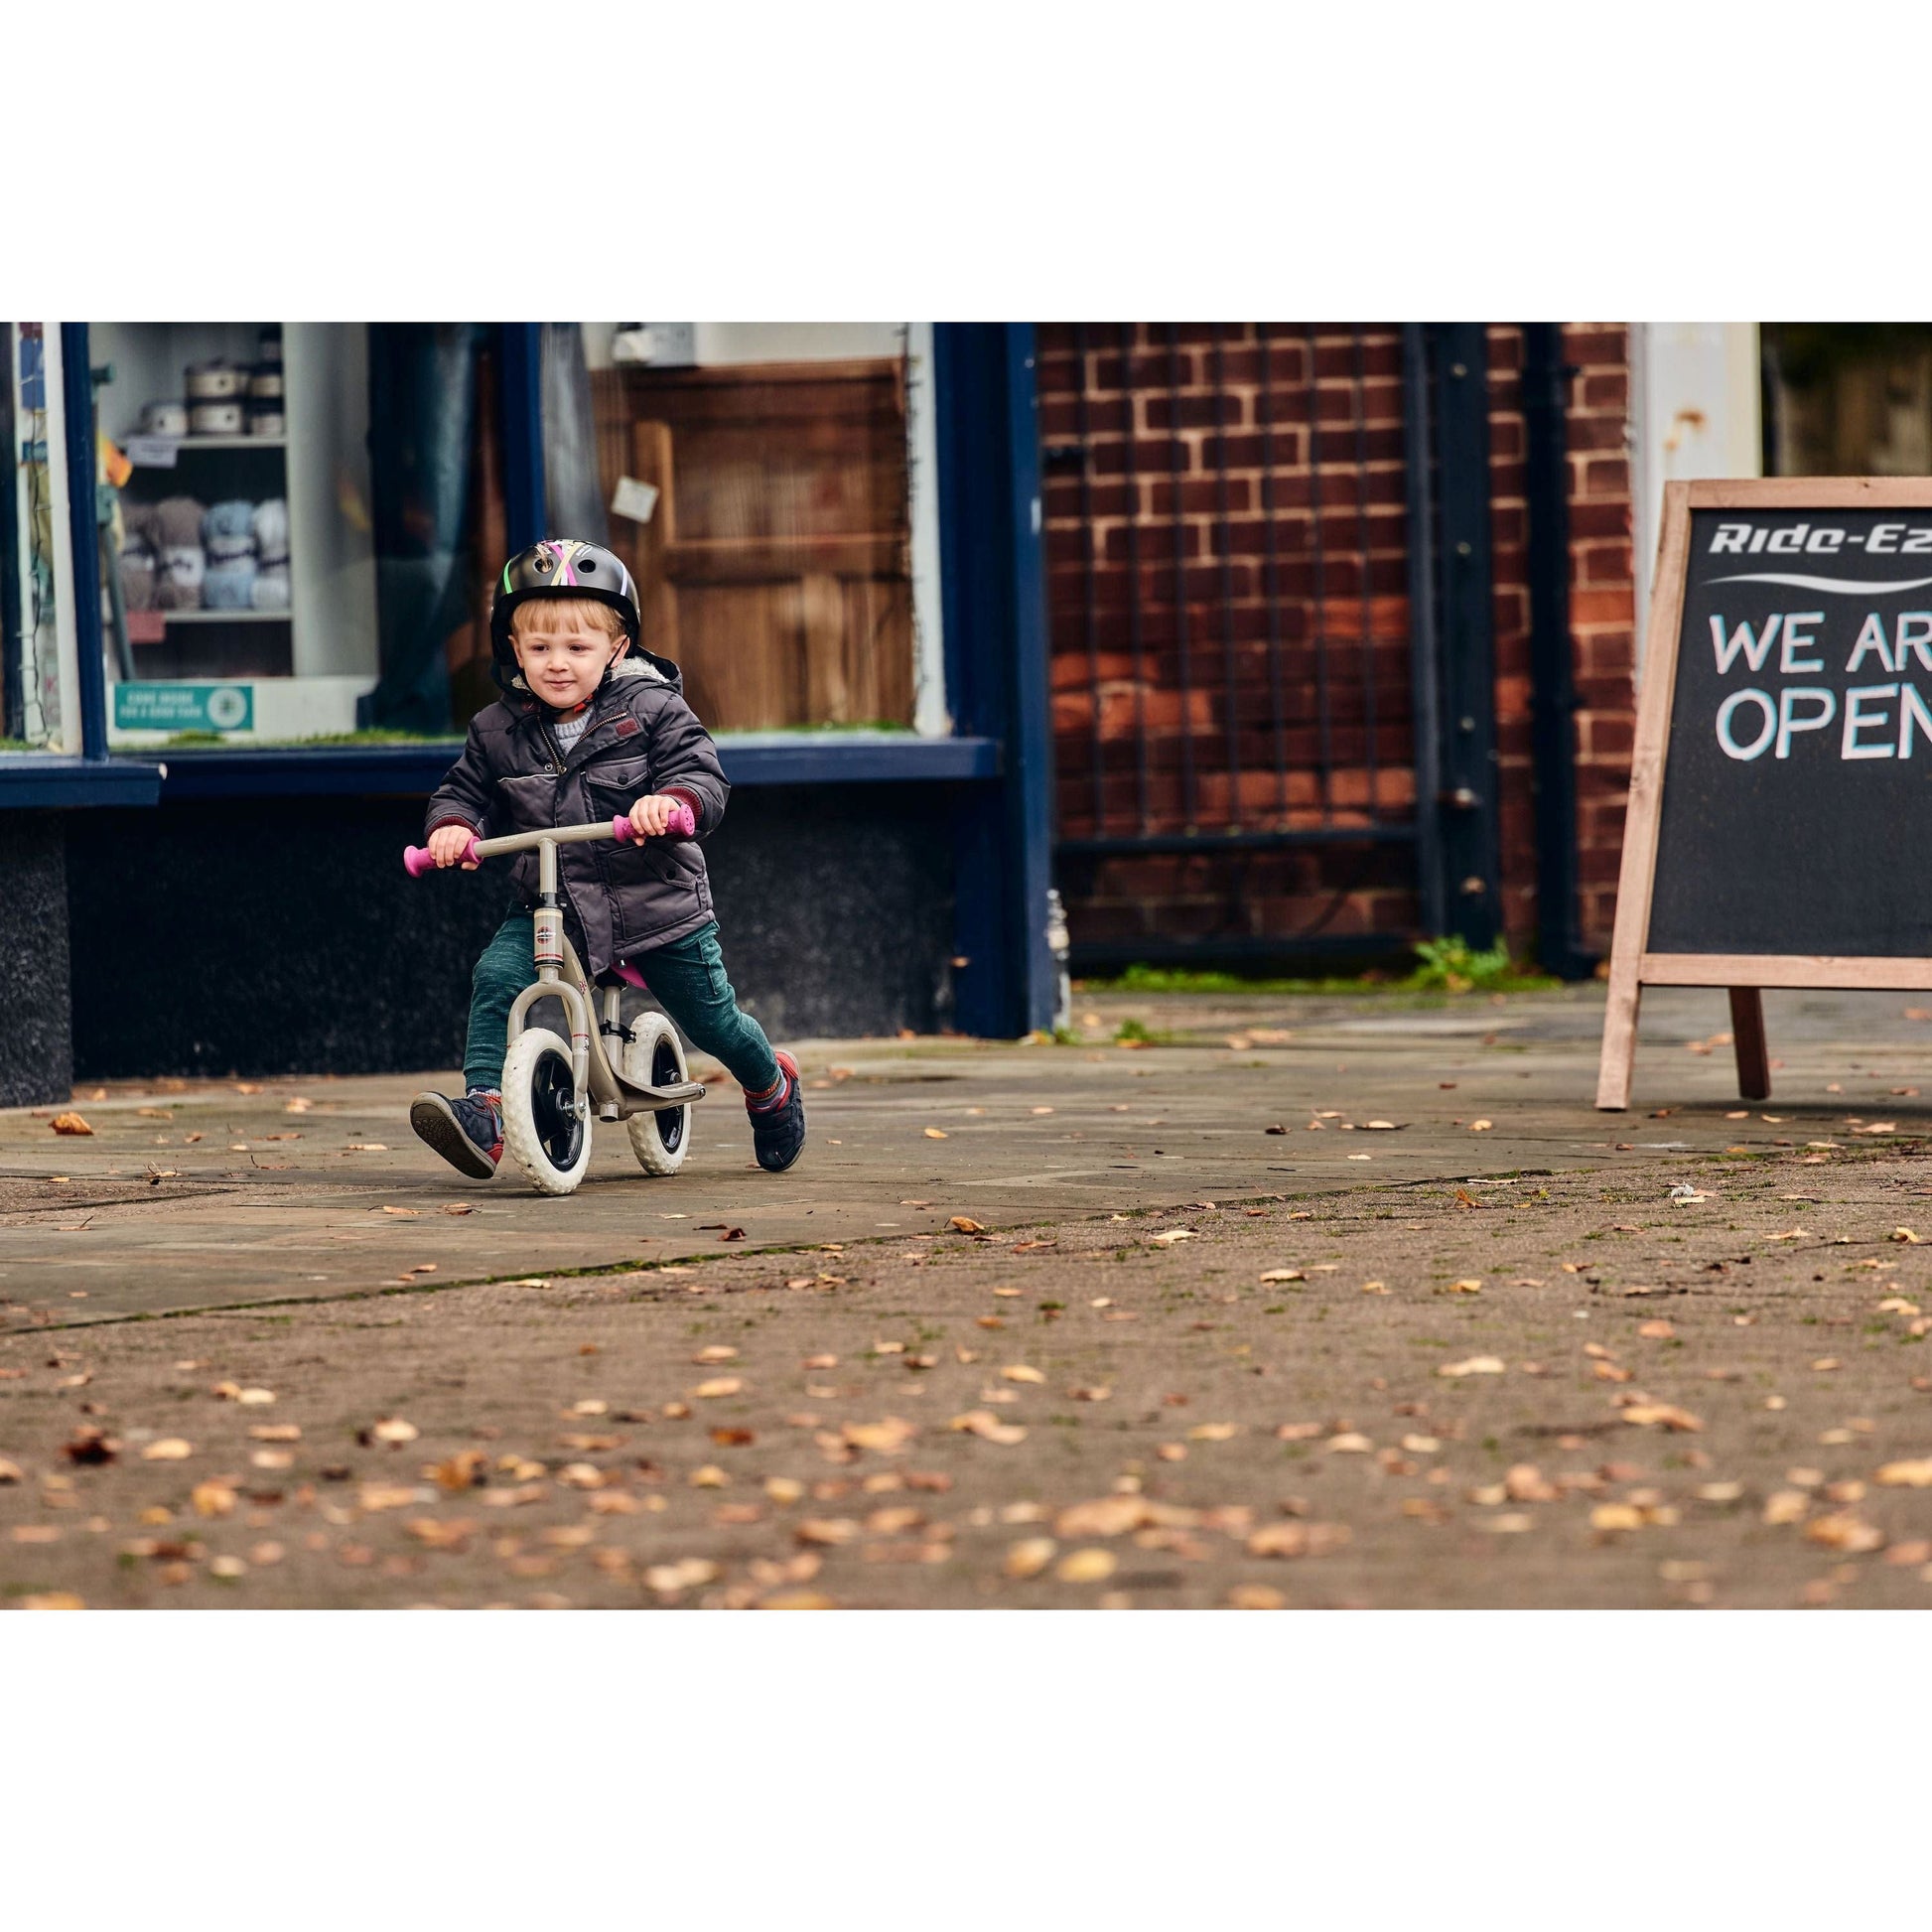 boy riding Ride-Ezy Go Balance Bike - Pink & Silver on pavement in front of shop